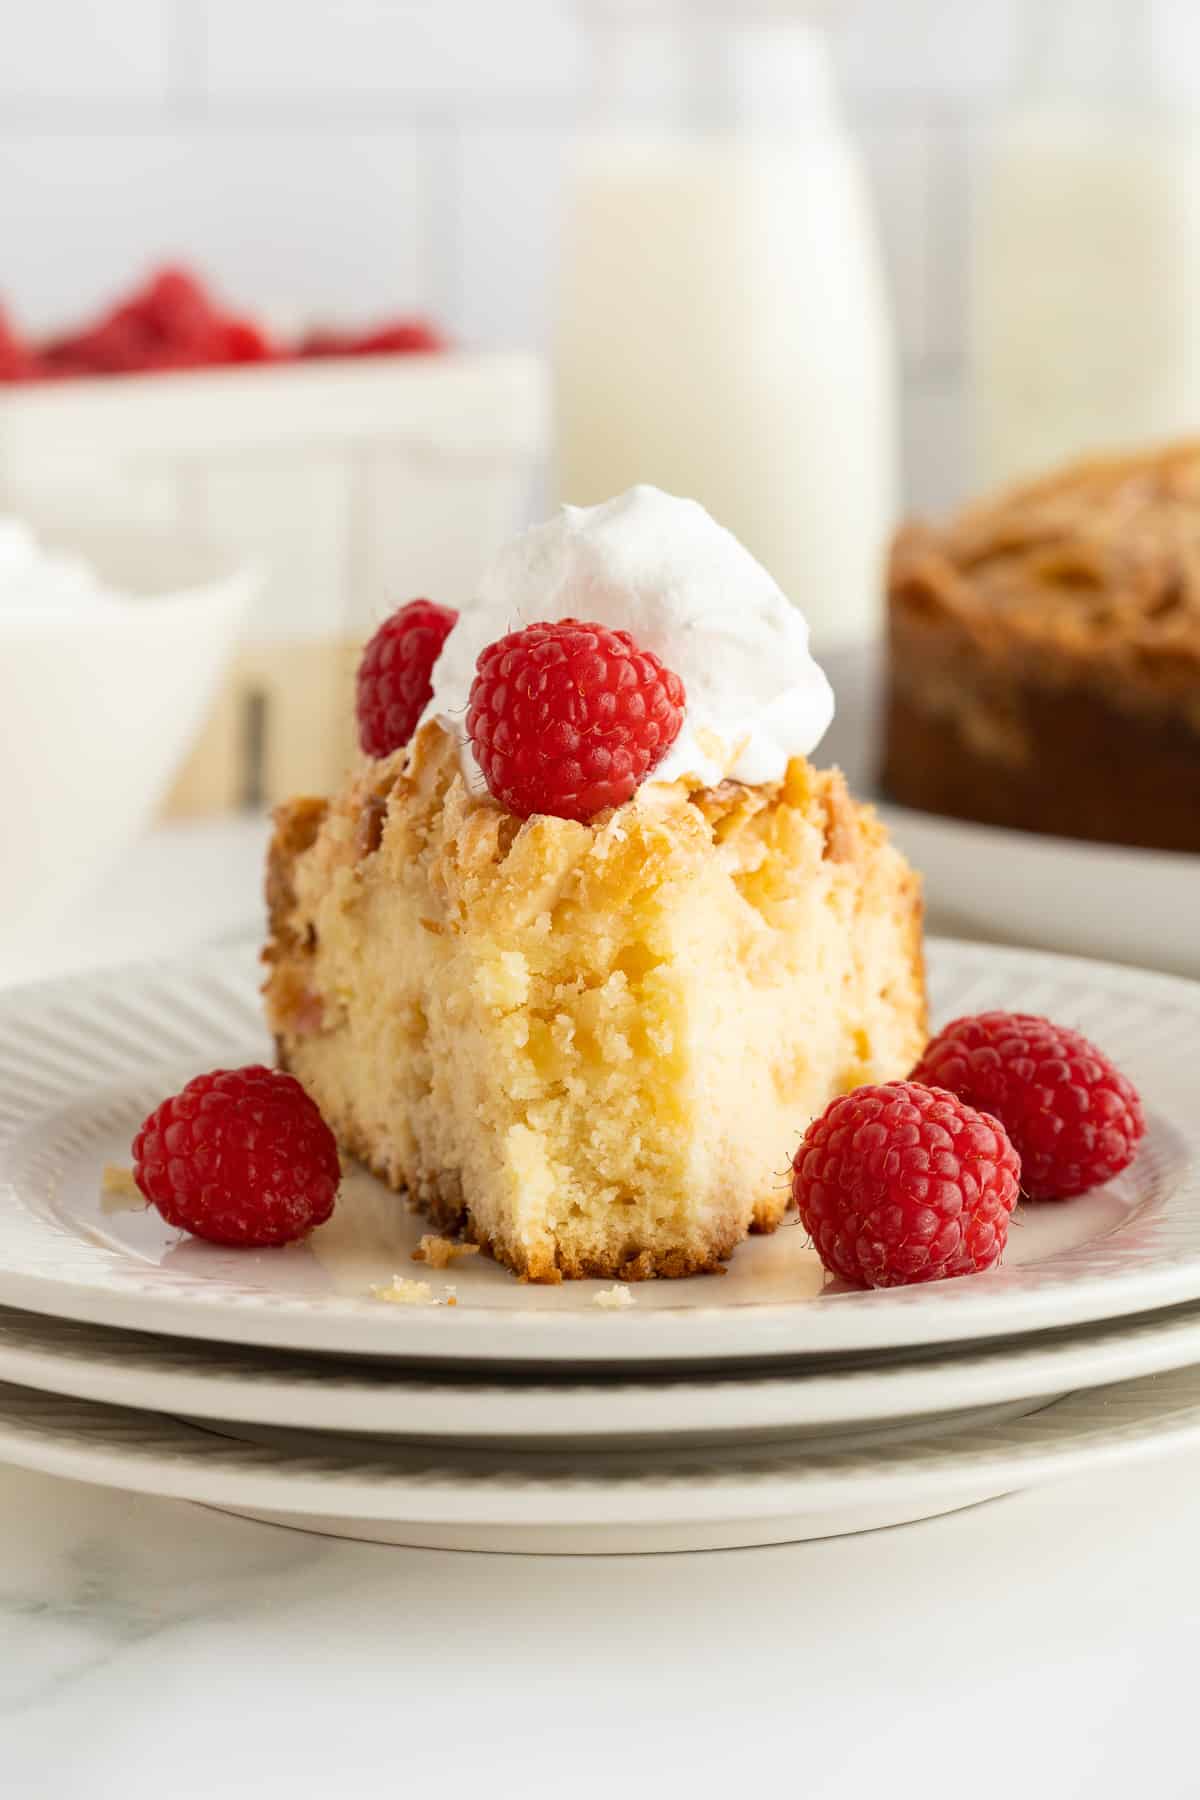 A slice of almond pound cake with a bite missing topped with whipped cream and raspberries on a white plate.